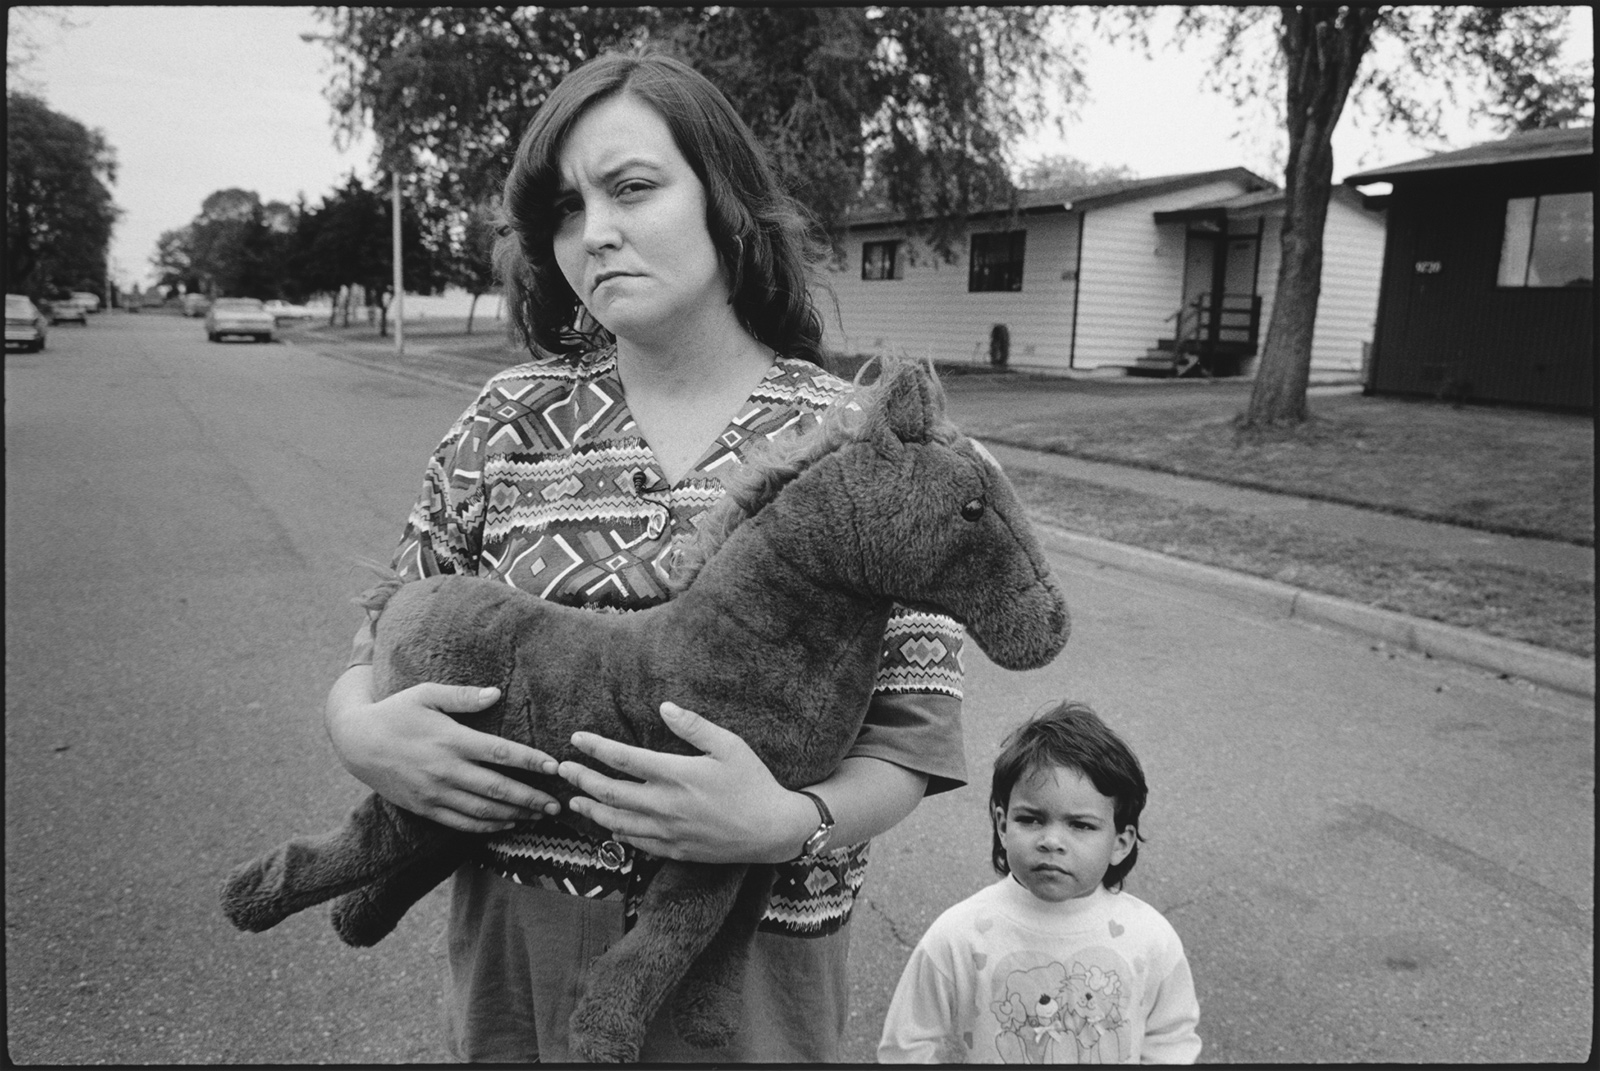 ‘Tiny holding Horsey with Keanna,’ Seattle, 1993; photograph by Mary Ellen Mark from the exhibition ‘Tiny: Streetwise Revisited,’ at the Aperture Foundation, New York City, May 26–June 30. The book includes essays by Isabel Allende and John Irving and is published by Aperture. The film ‘Tiny: The Life of Erin Blackwell,’ made by Mark and her husband Martin Bell, will be shown at BAMcinemaFest on June 25.